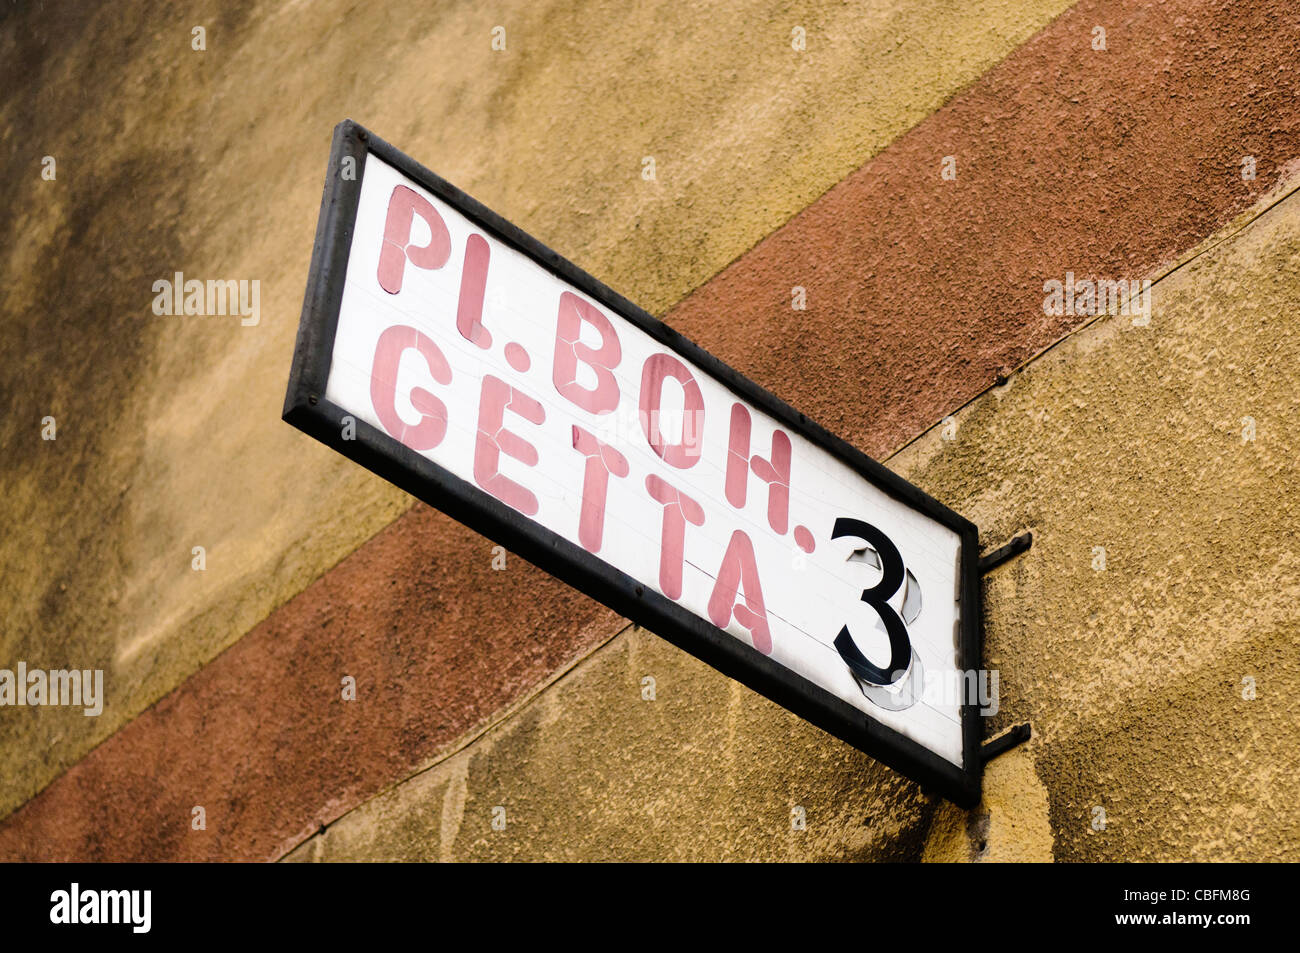 Street sign at Plac Bohaterow Getta, Krakow Stock Photo